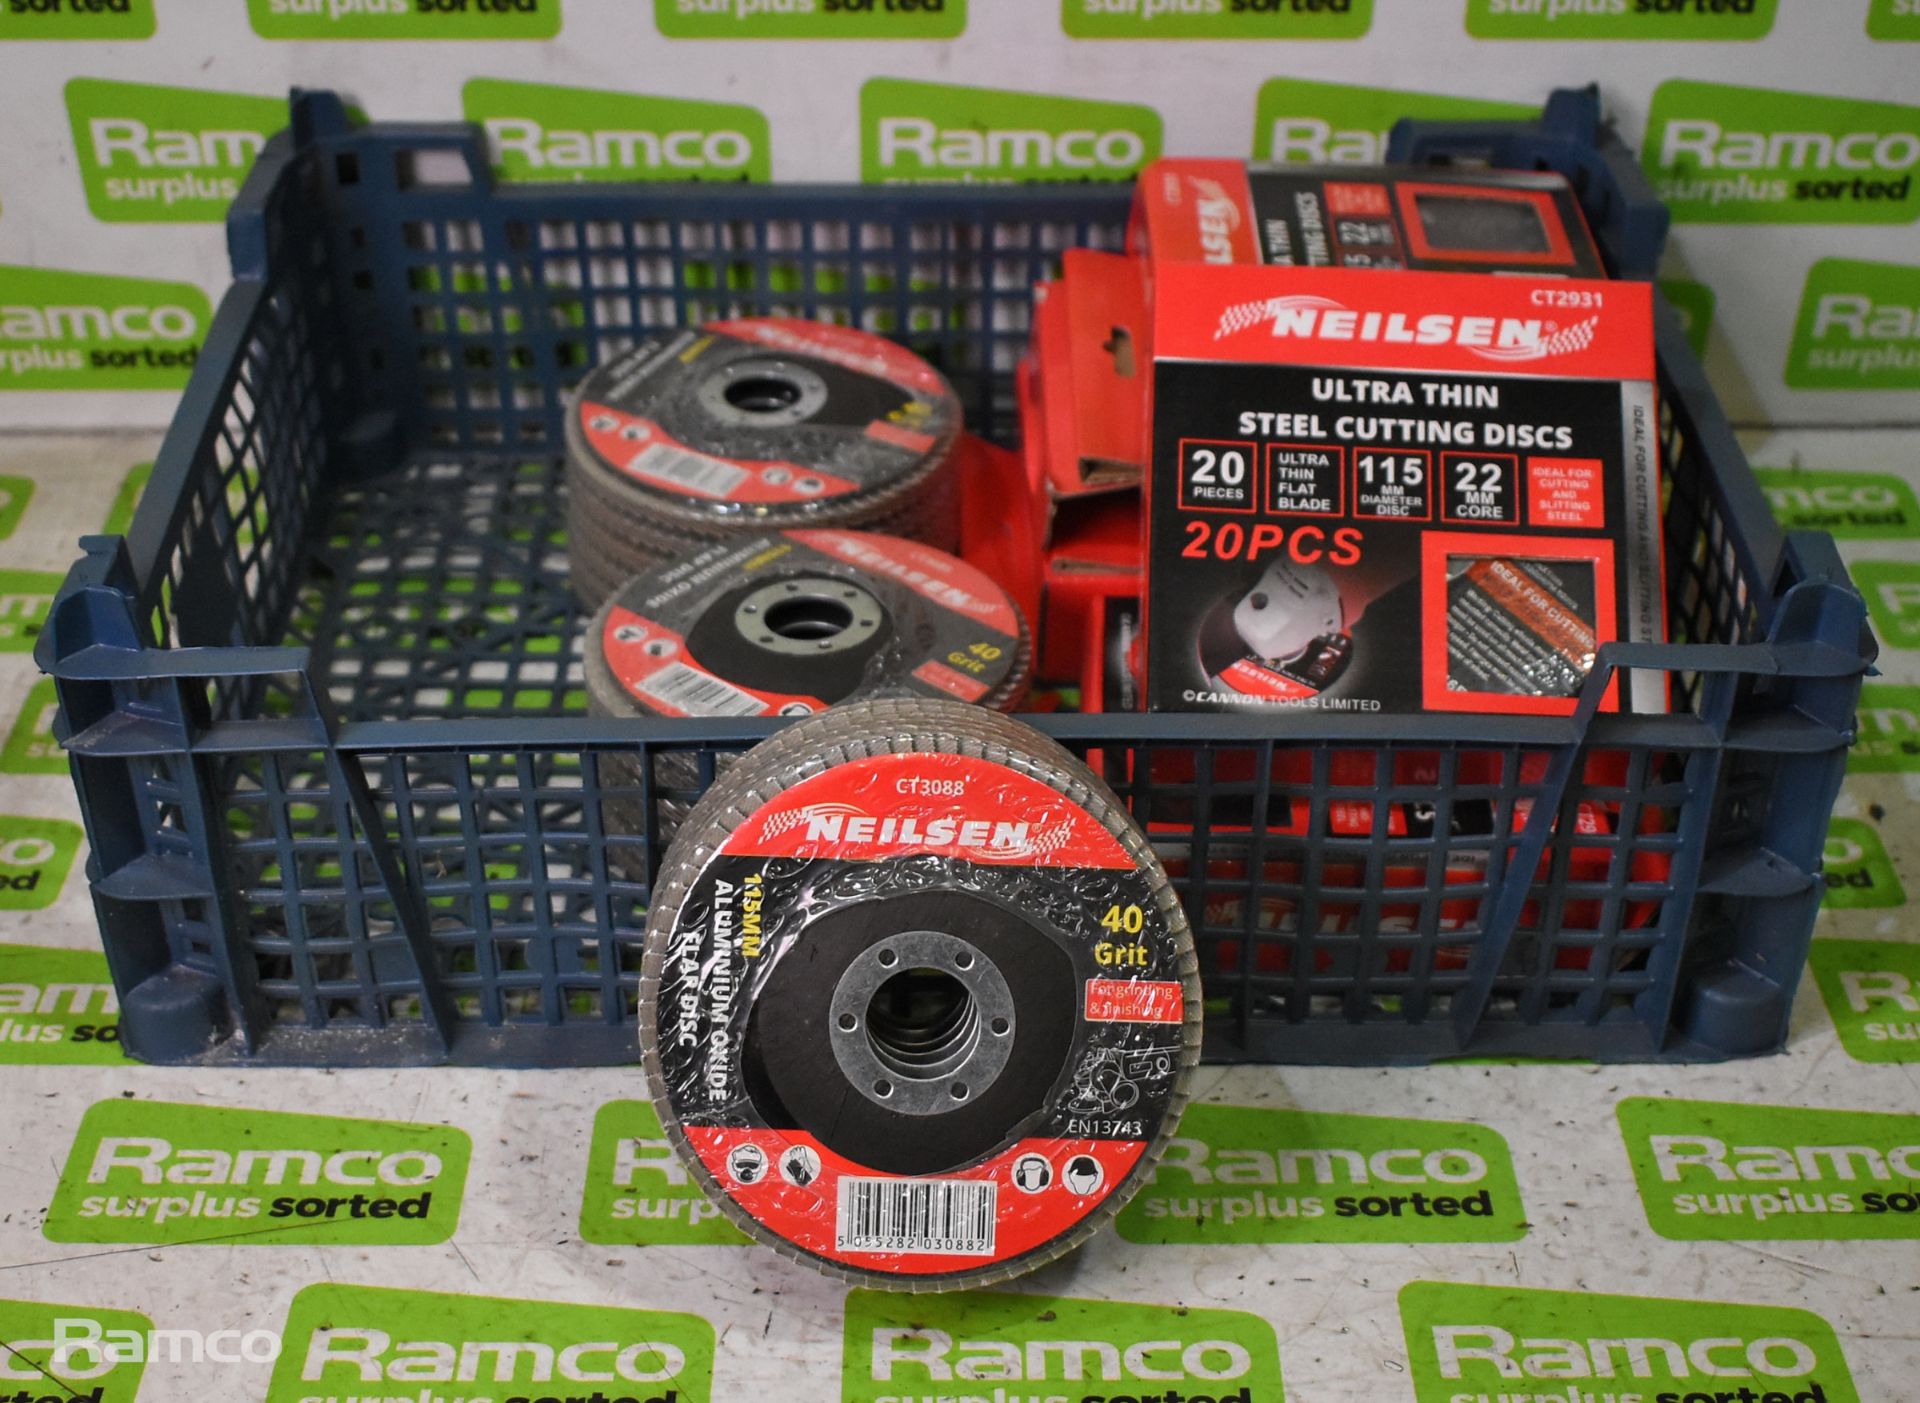 5x 10 piece stubby spanner sets, 100x Neilsen ultra thin steel cutting discs 115mm & more - Image 6 of 11